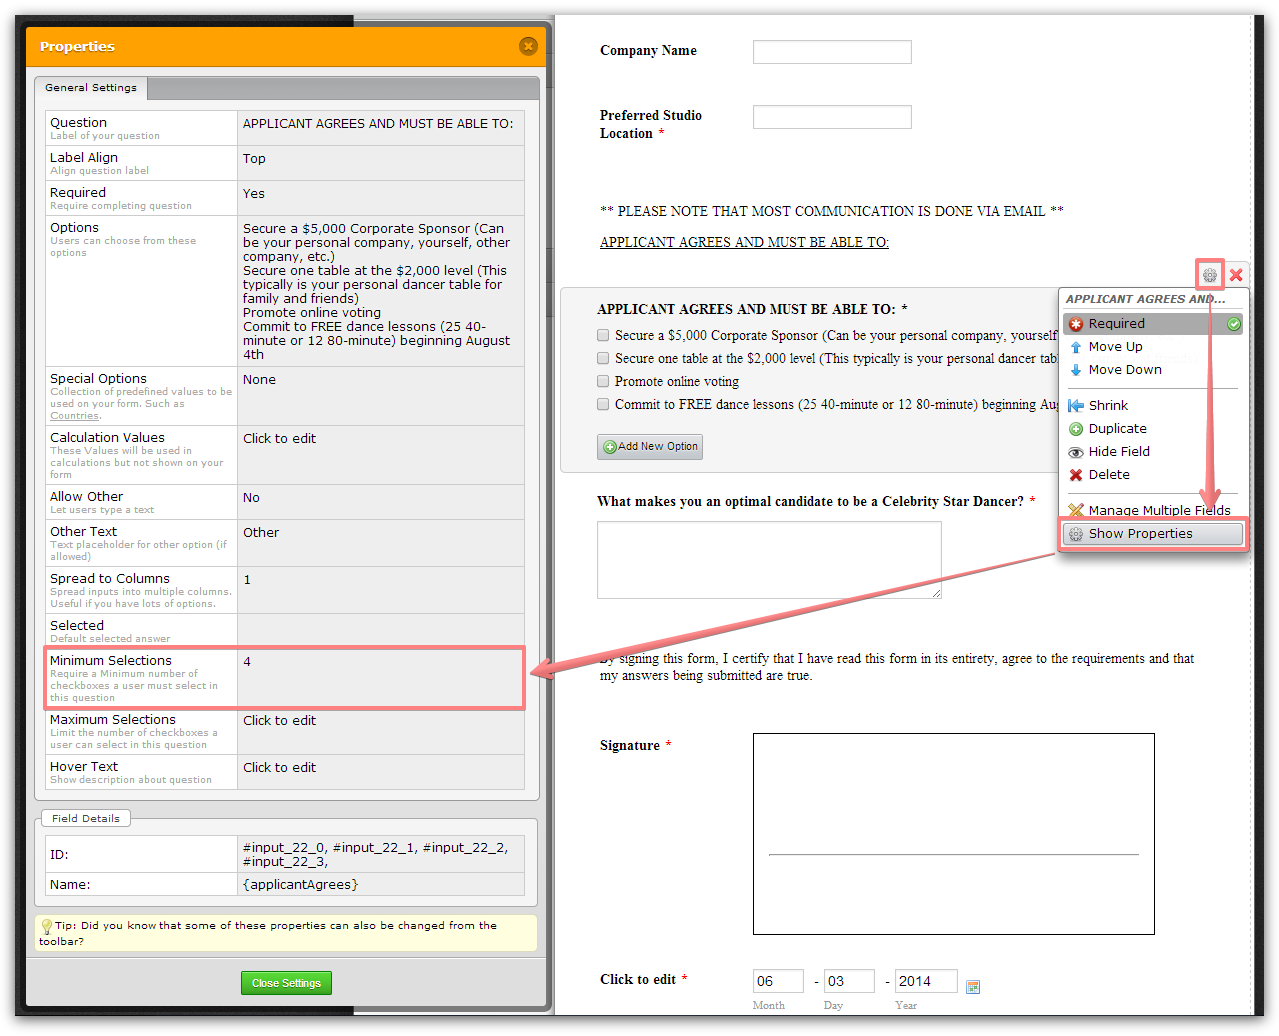 Checklist spacing/requirement settings and minimum selections limit Image 1 Screenshot 20